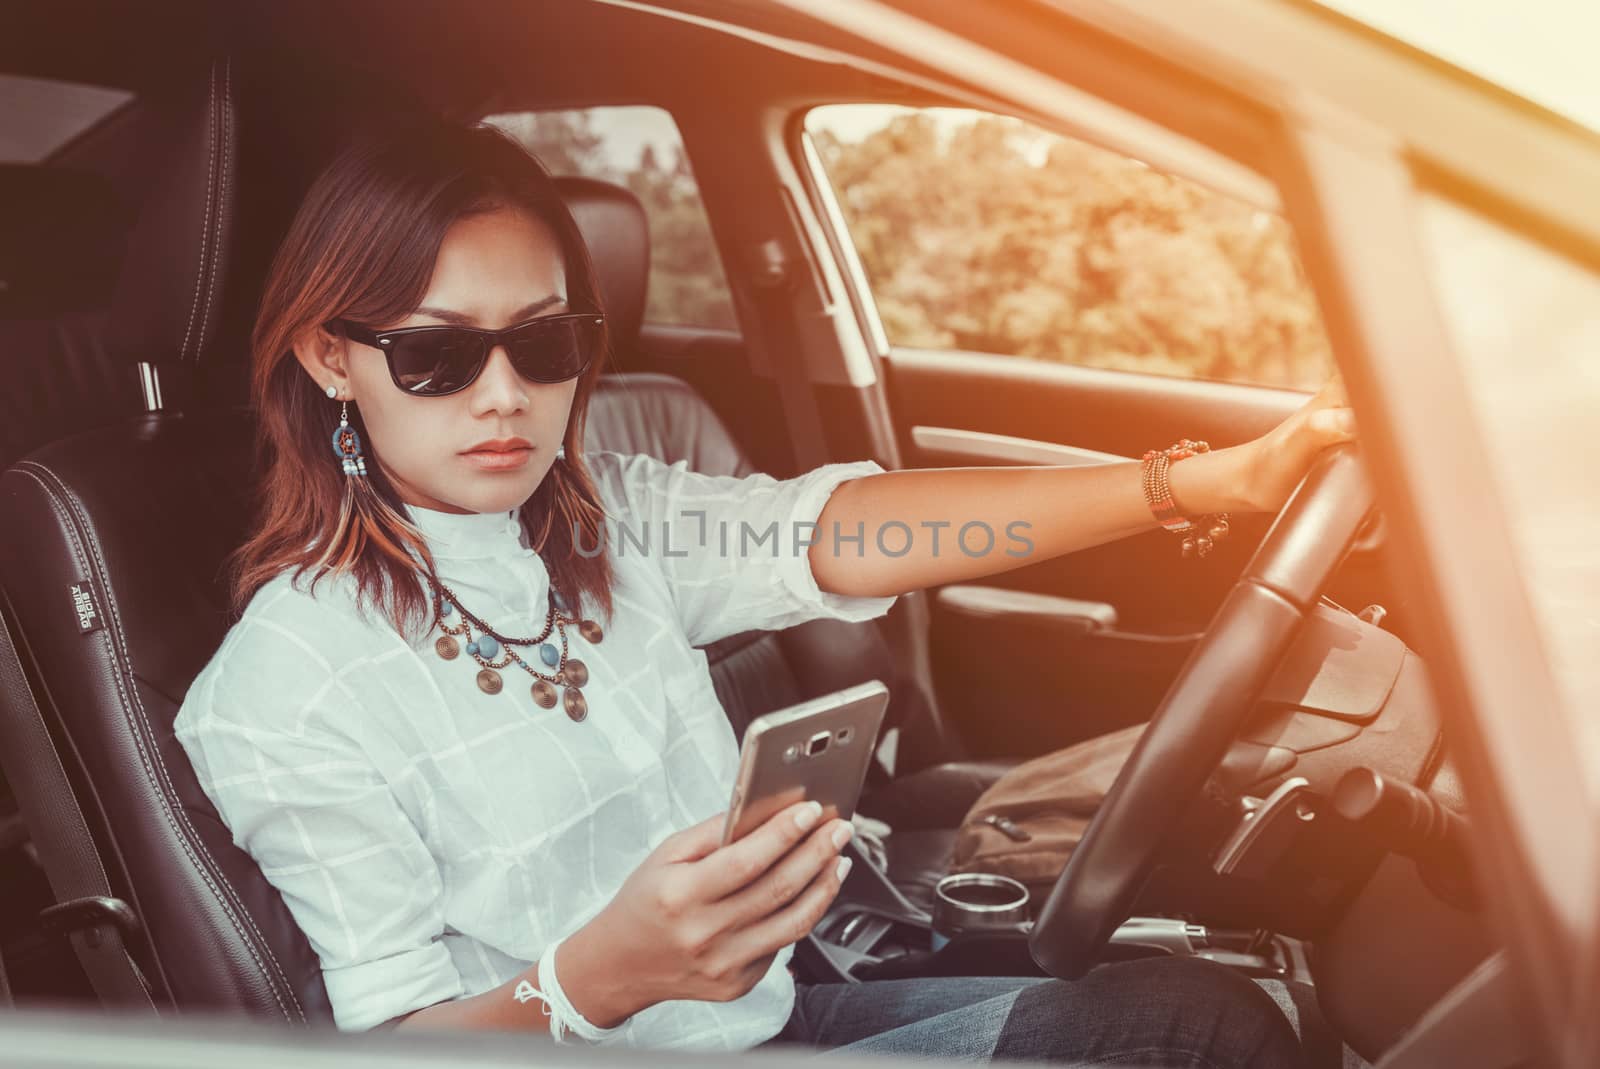 Asian woman looking at a smartphone in the car.